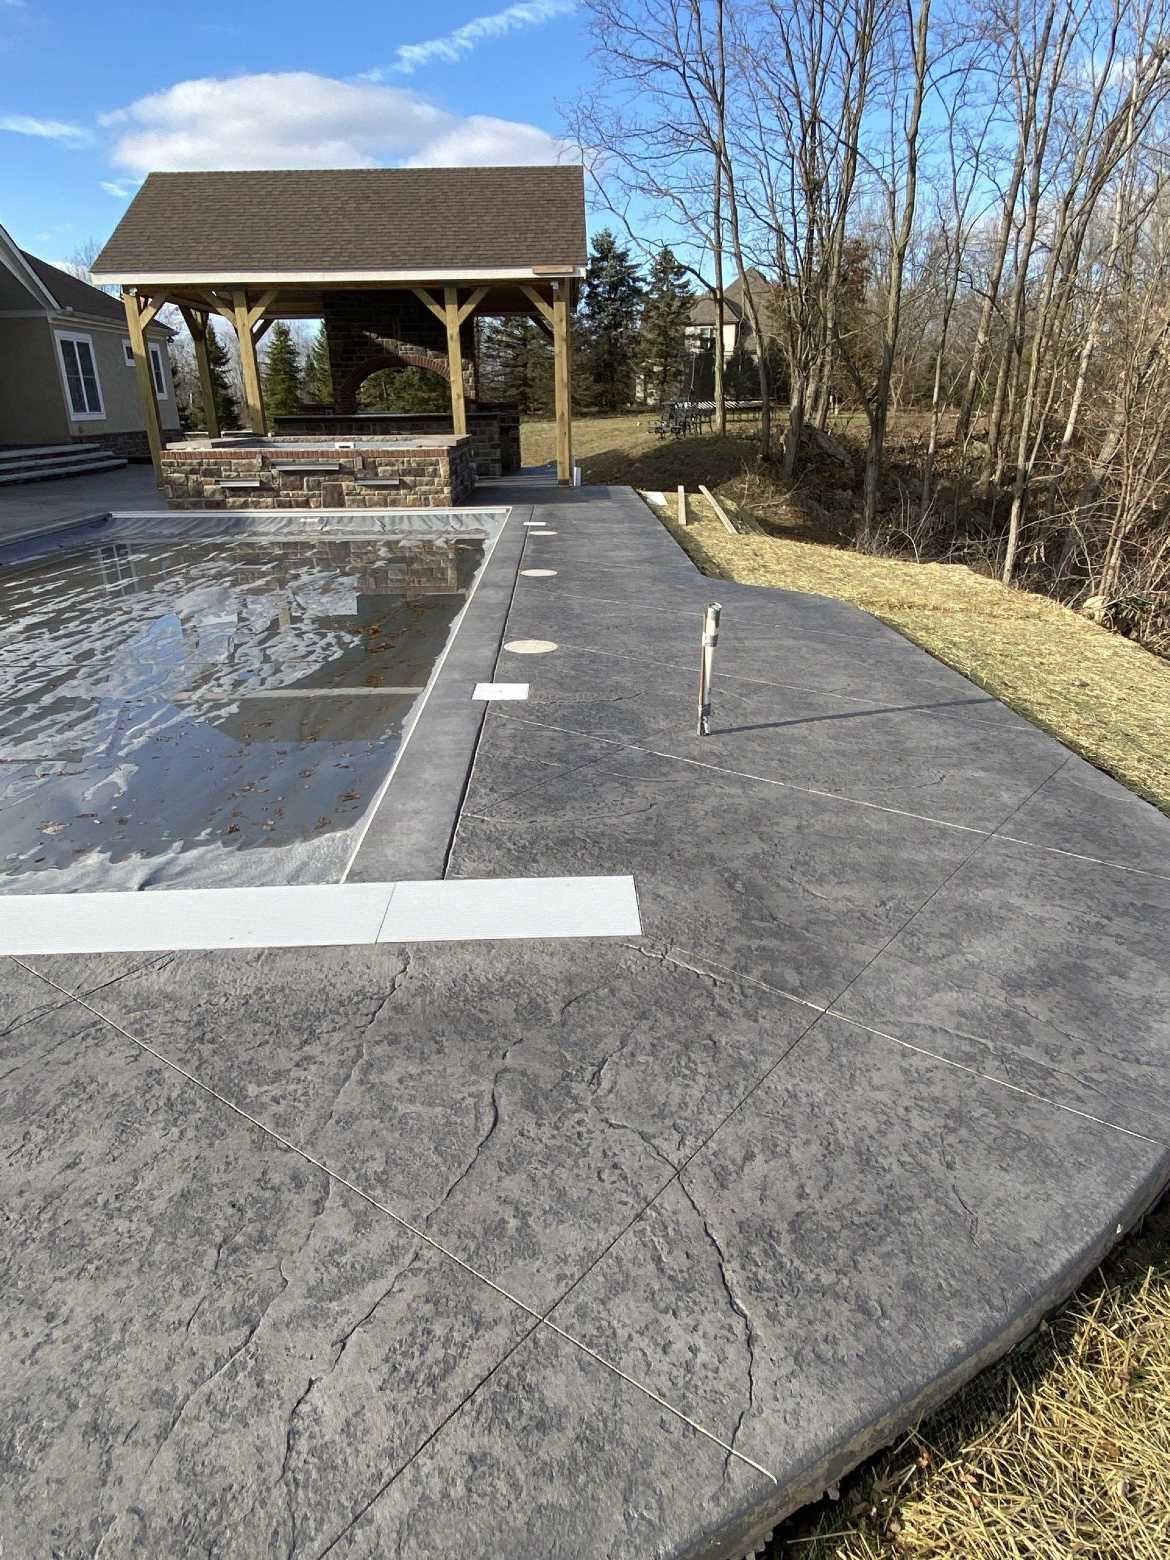 A rectangular pool is surrounded by stamped concrete.